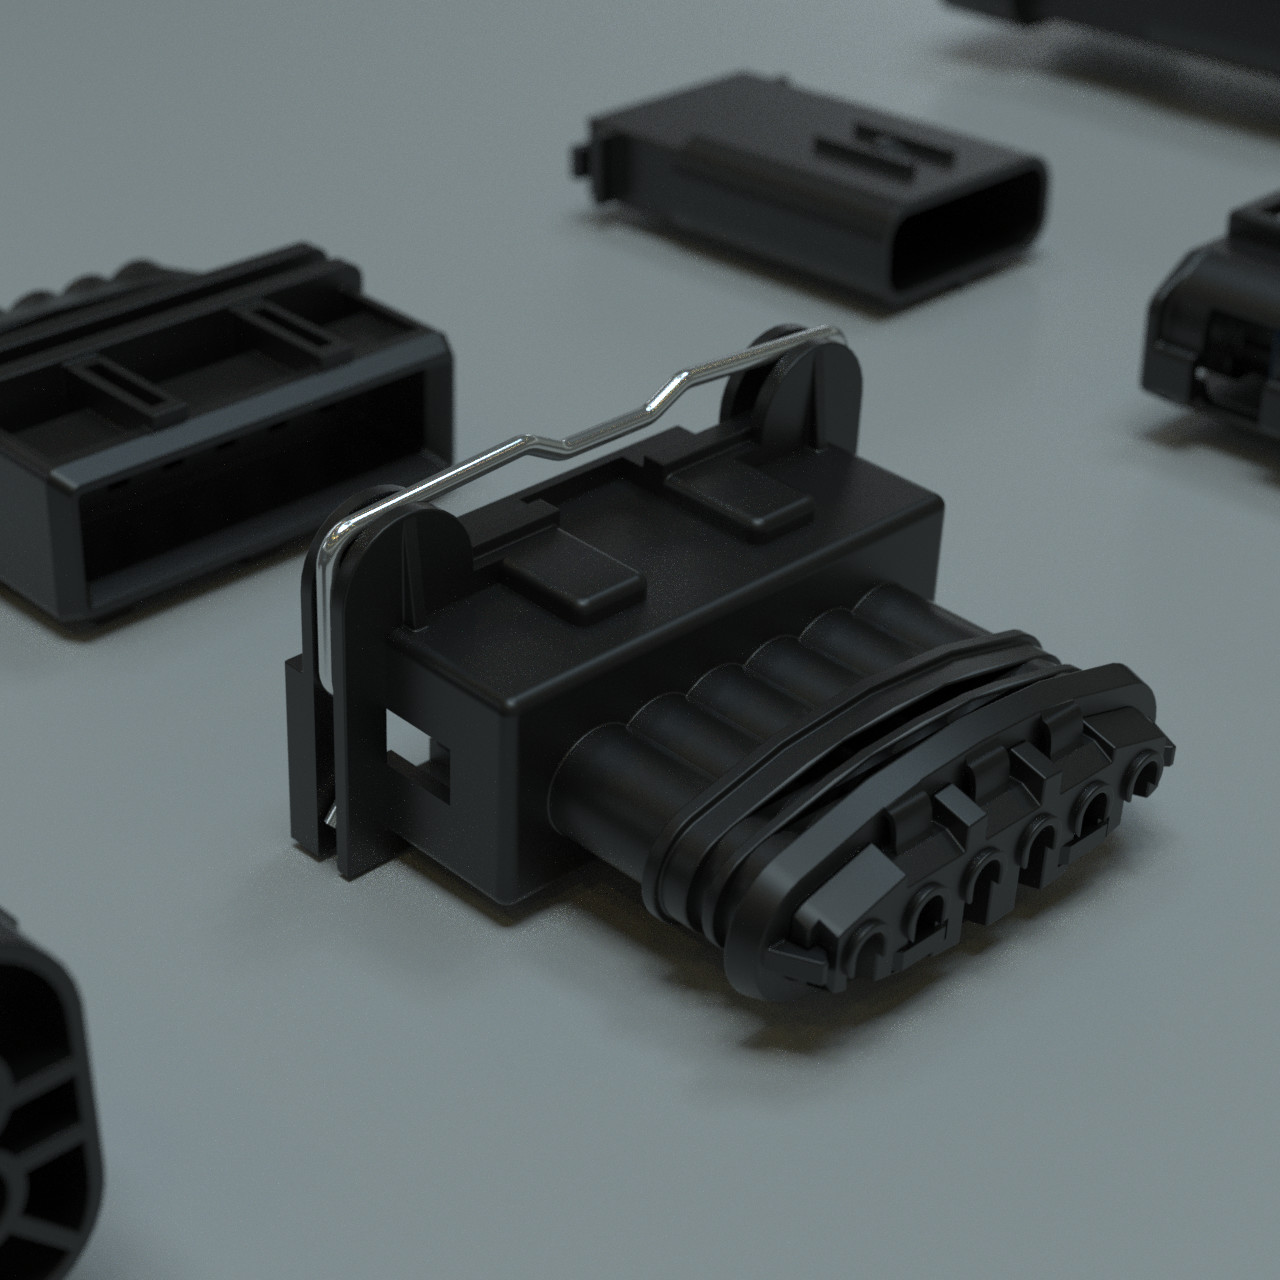 Hard Surface Modeling with CAD - Plastic Sockets